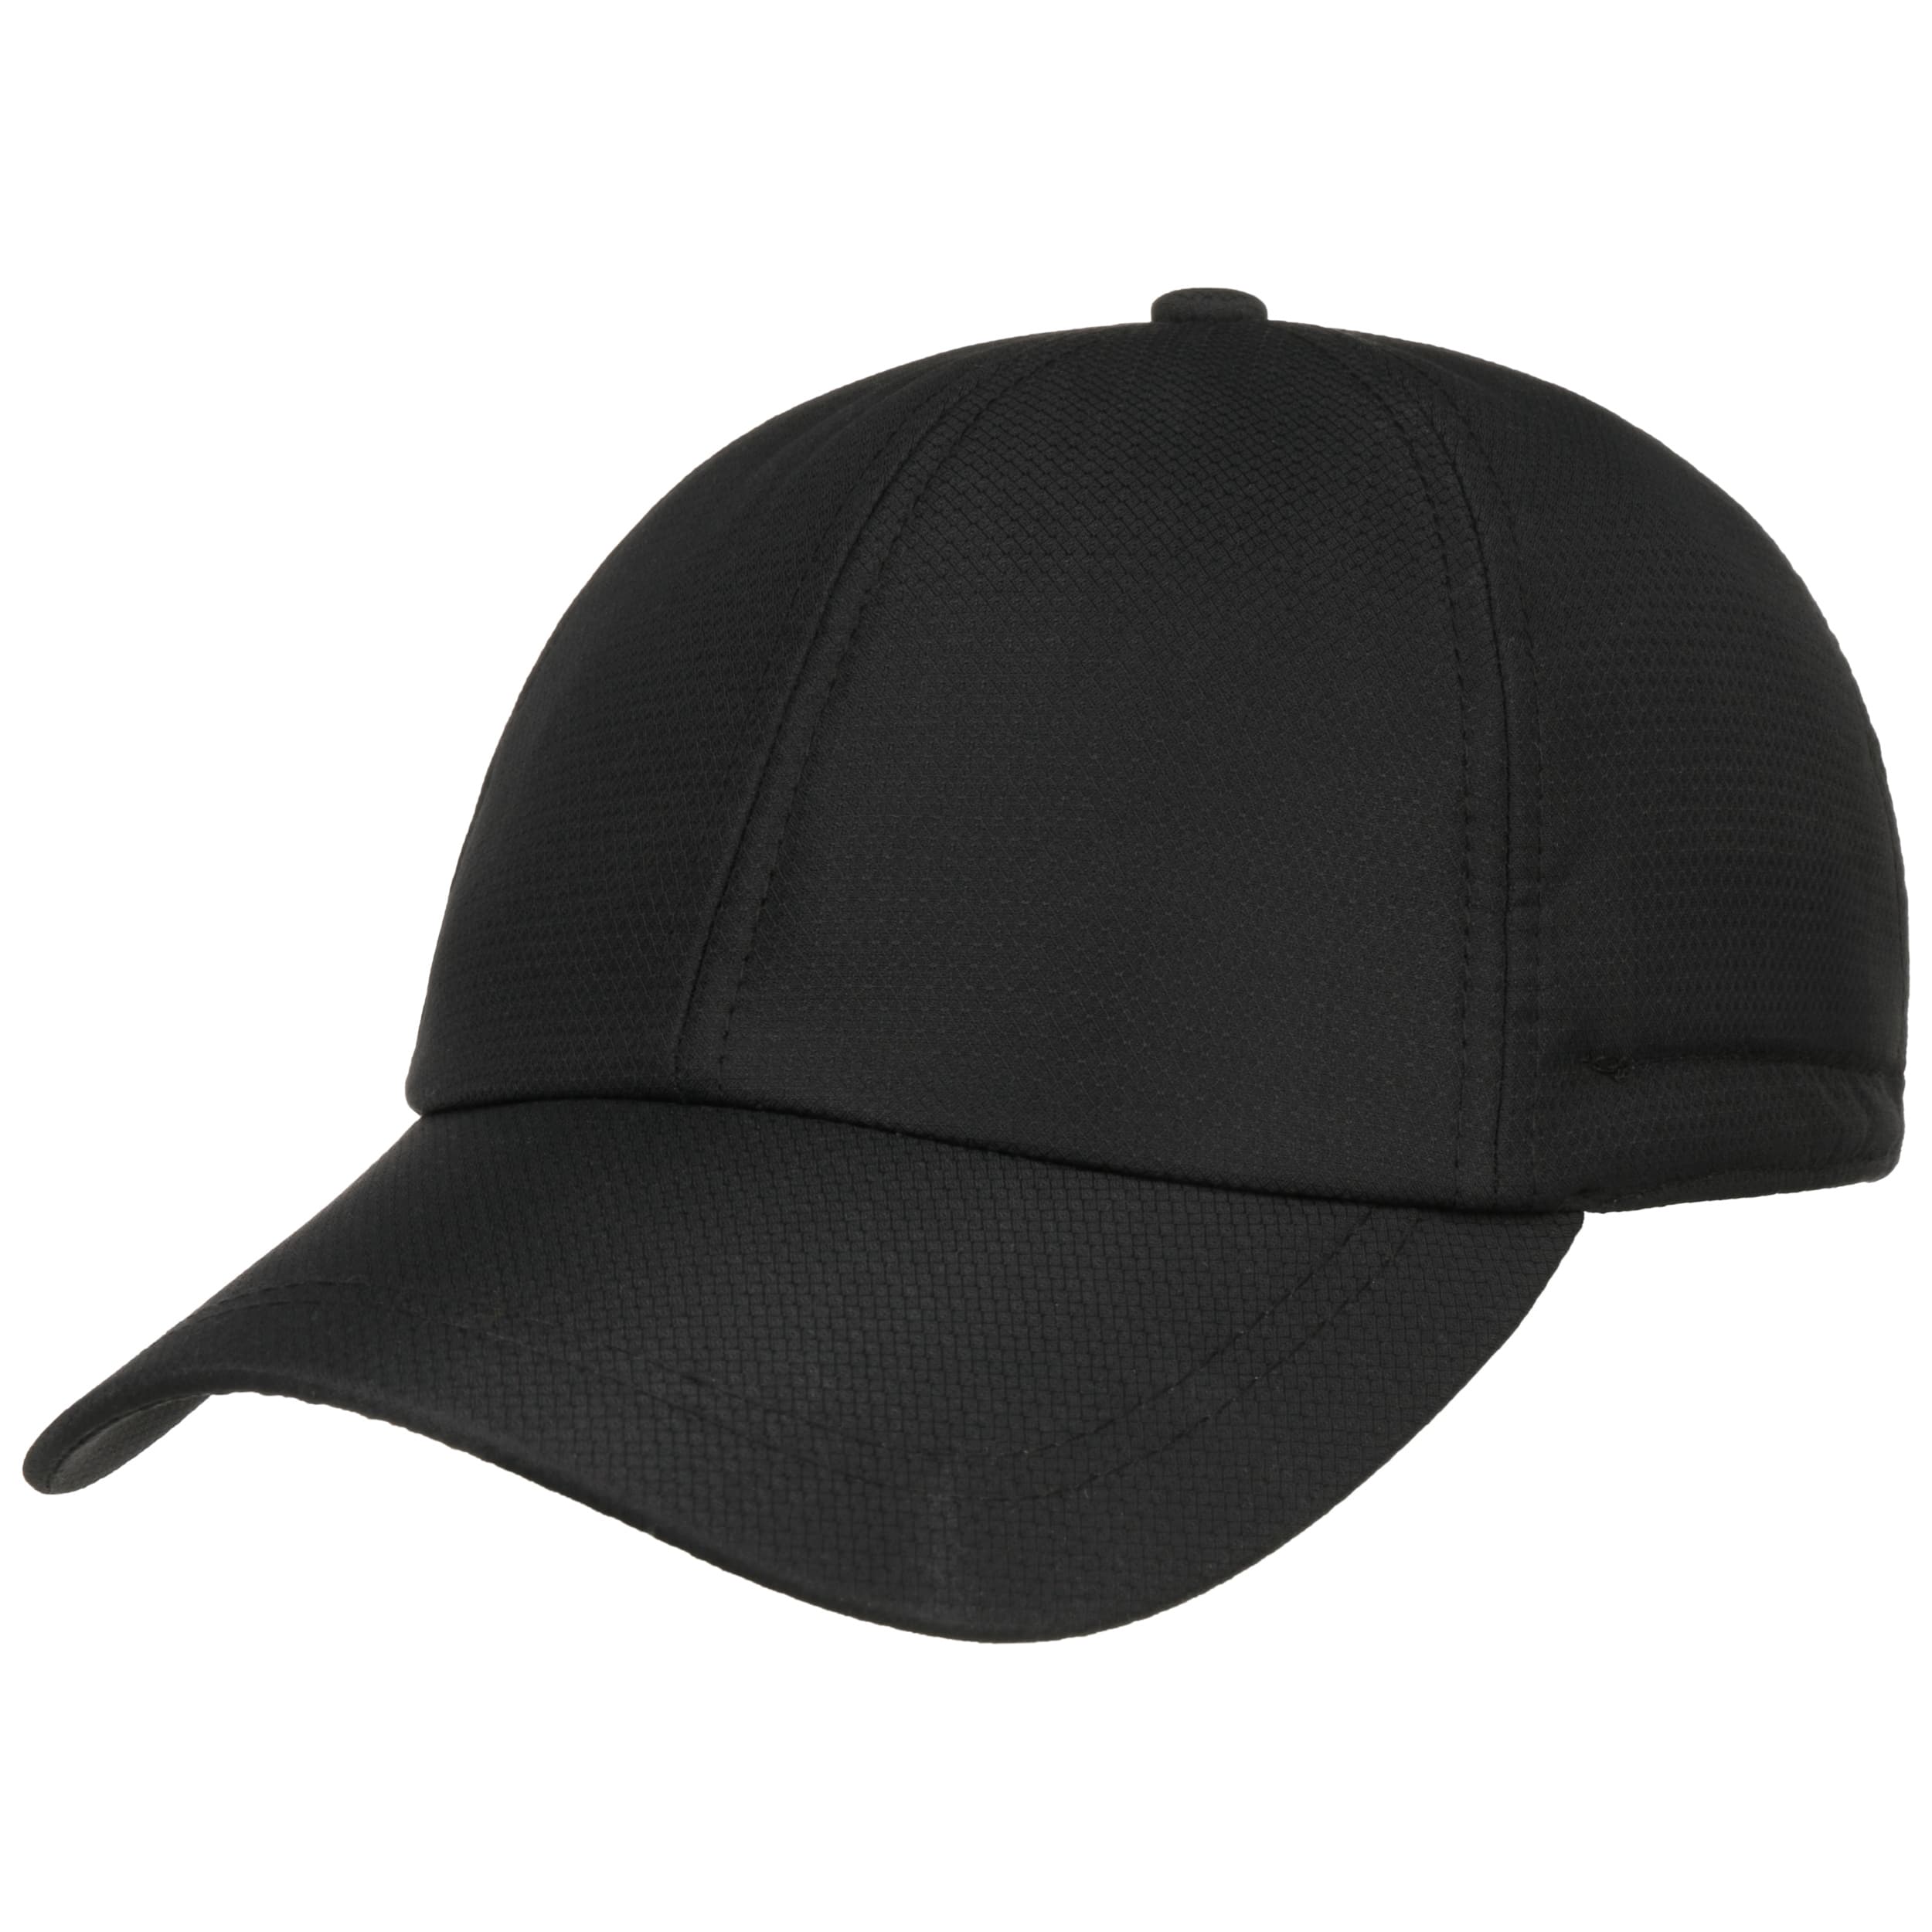 by € Lipodo 3M 29,95 Thinsulate - mit Ohrenklappen Cap